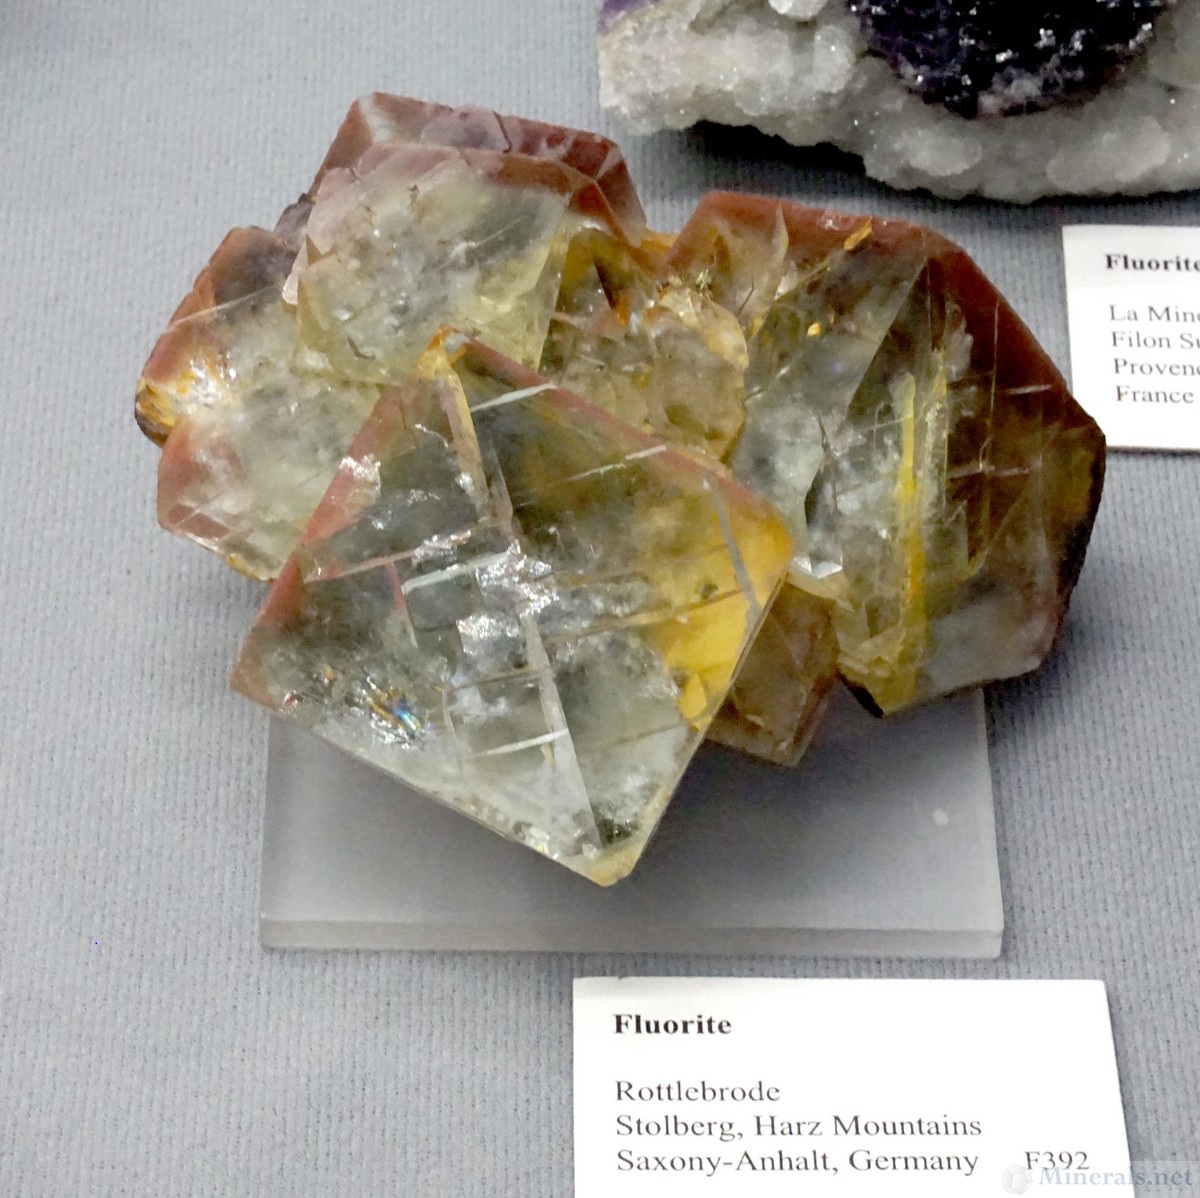 Multicolored Fluorite from Rottlebrode, Stolberg, Harz Mountains, Germany, Jesse Fisher